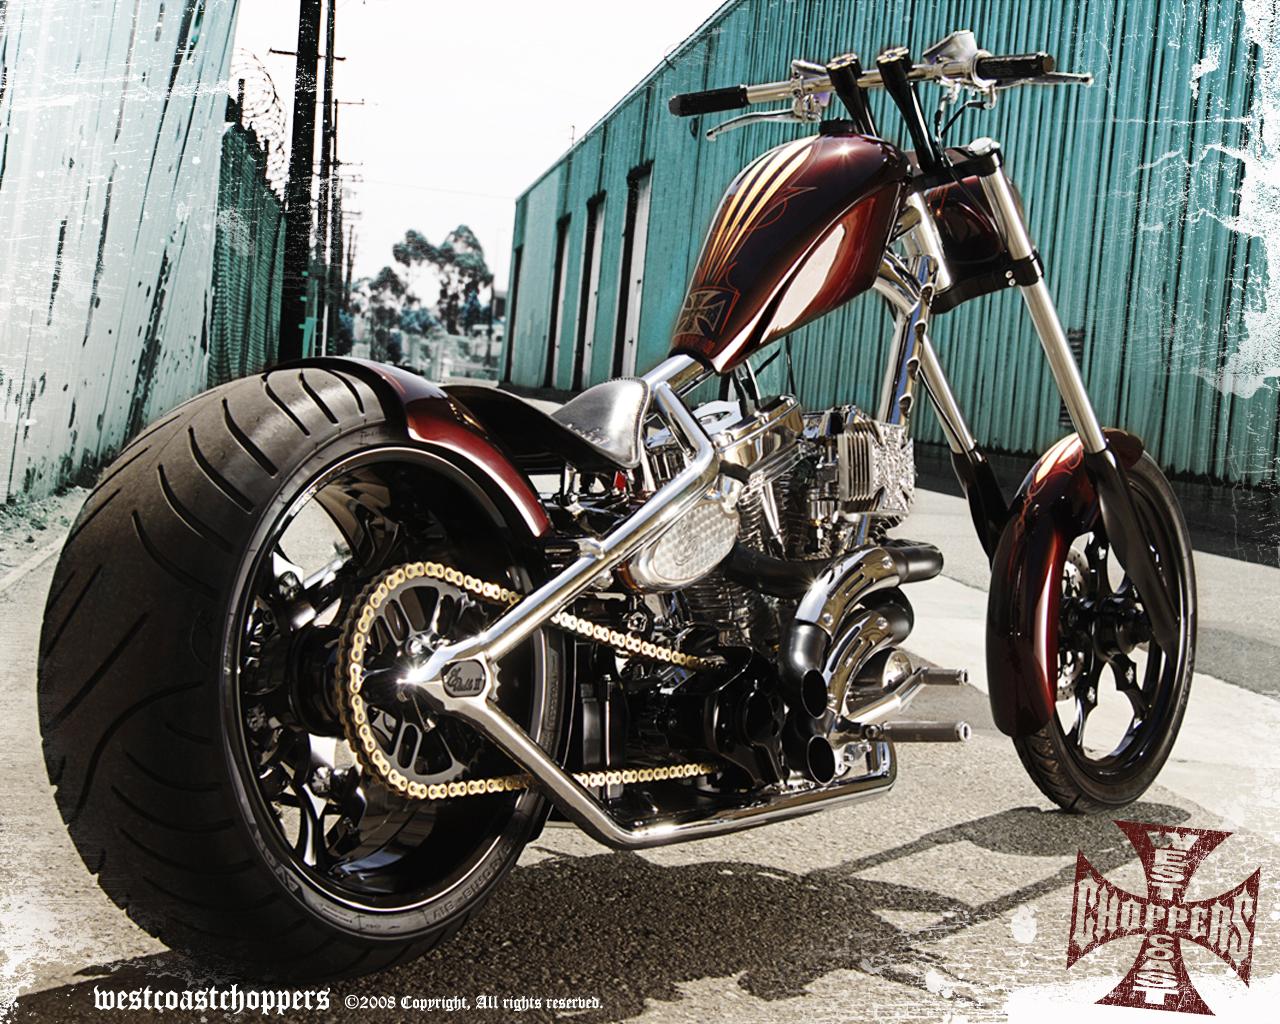  Choppers wallpapers West Cost Choppers theme bikes Cavallera Choppers